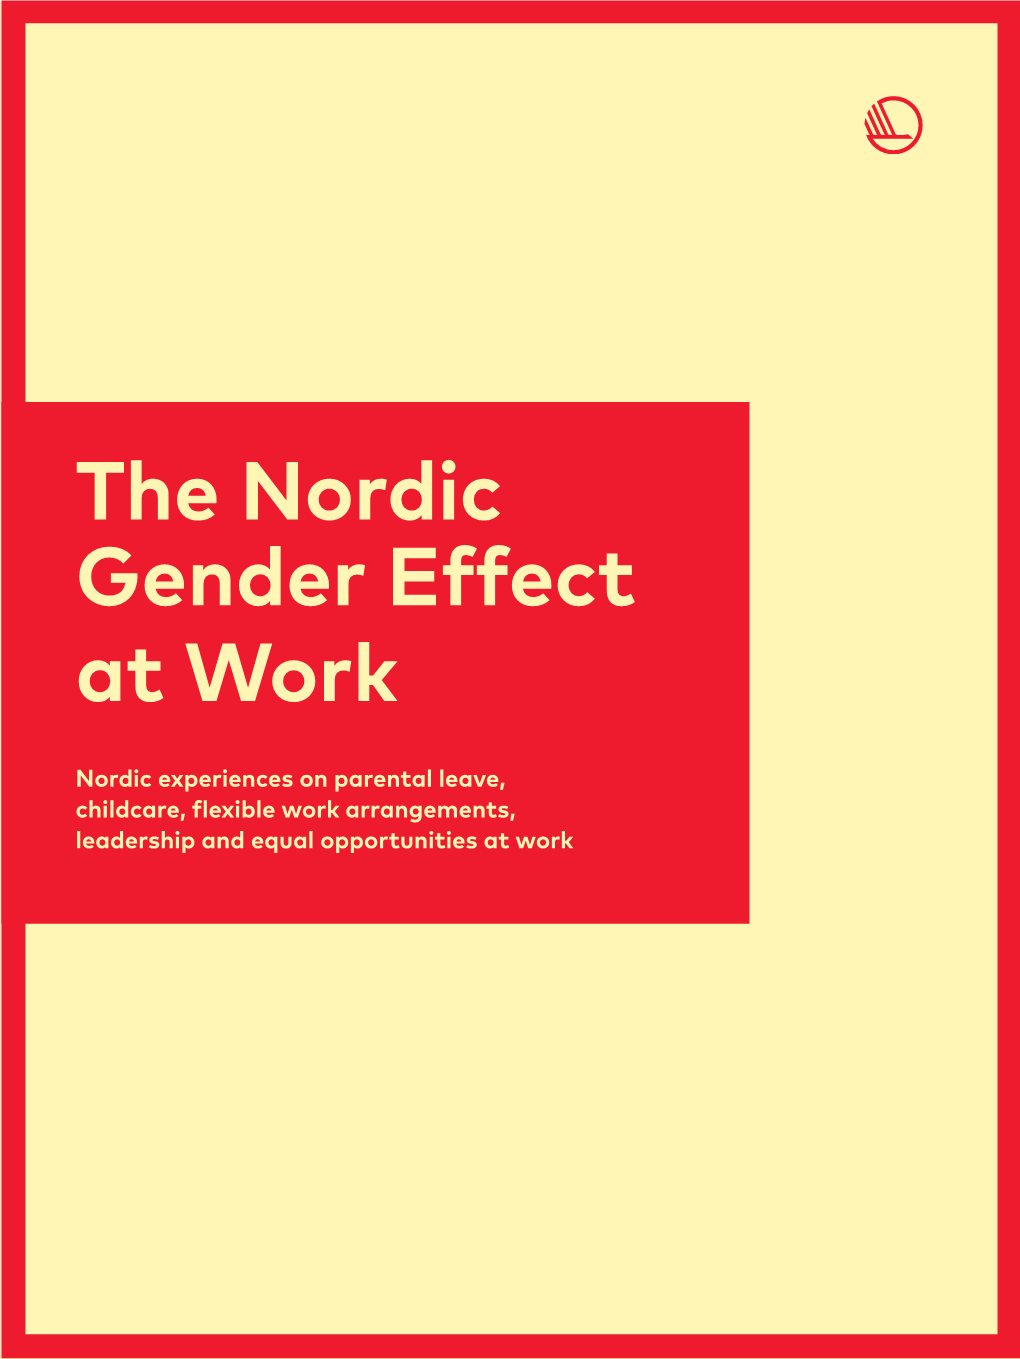 The Nordic Gender Effect at Work